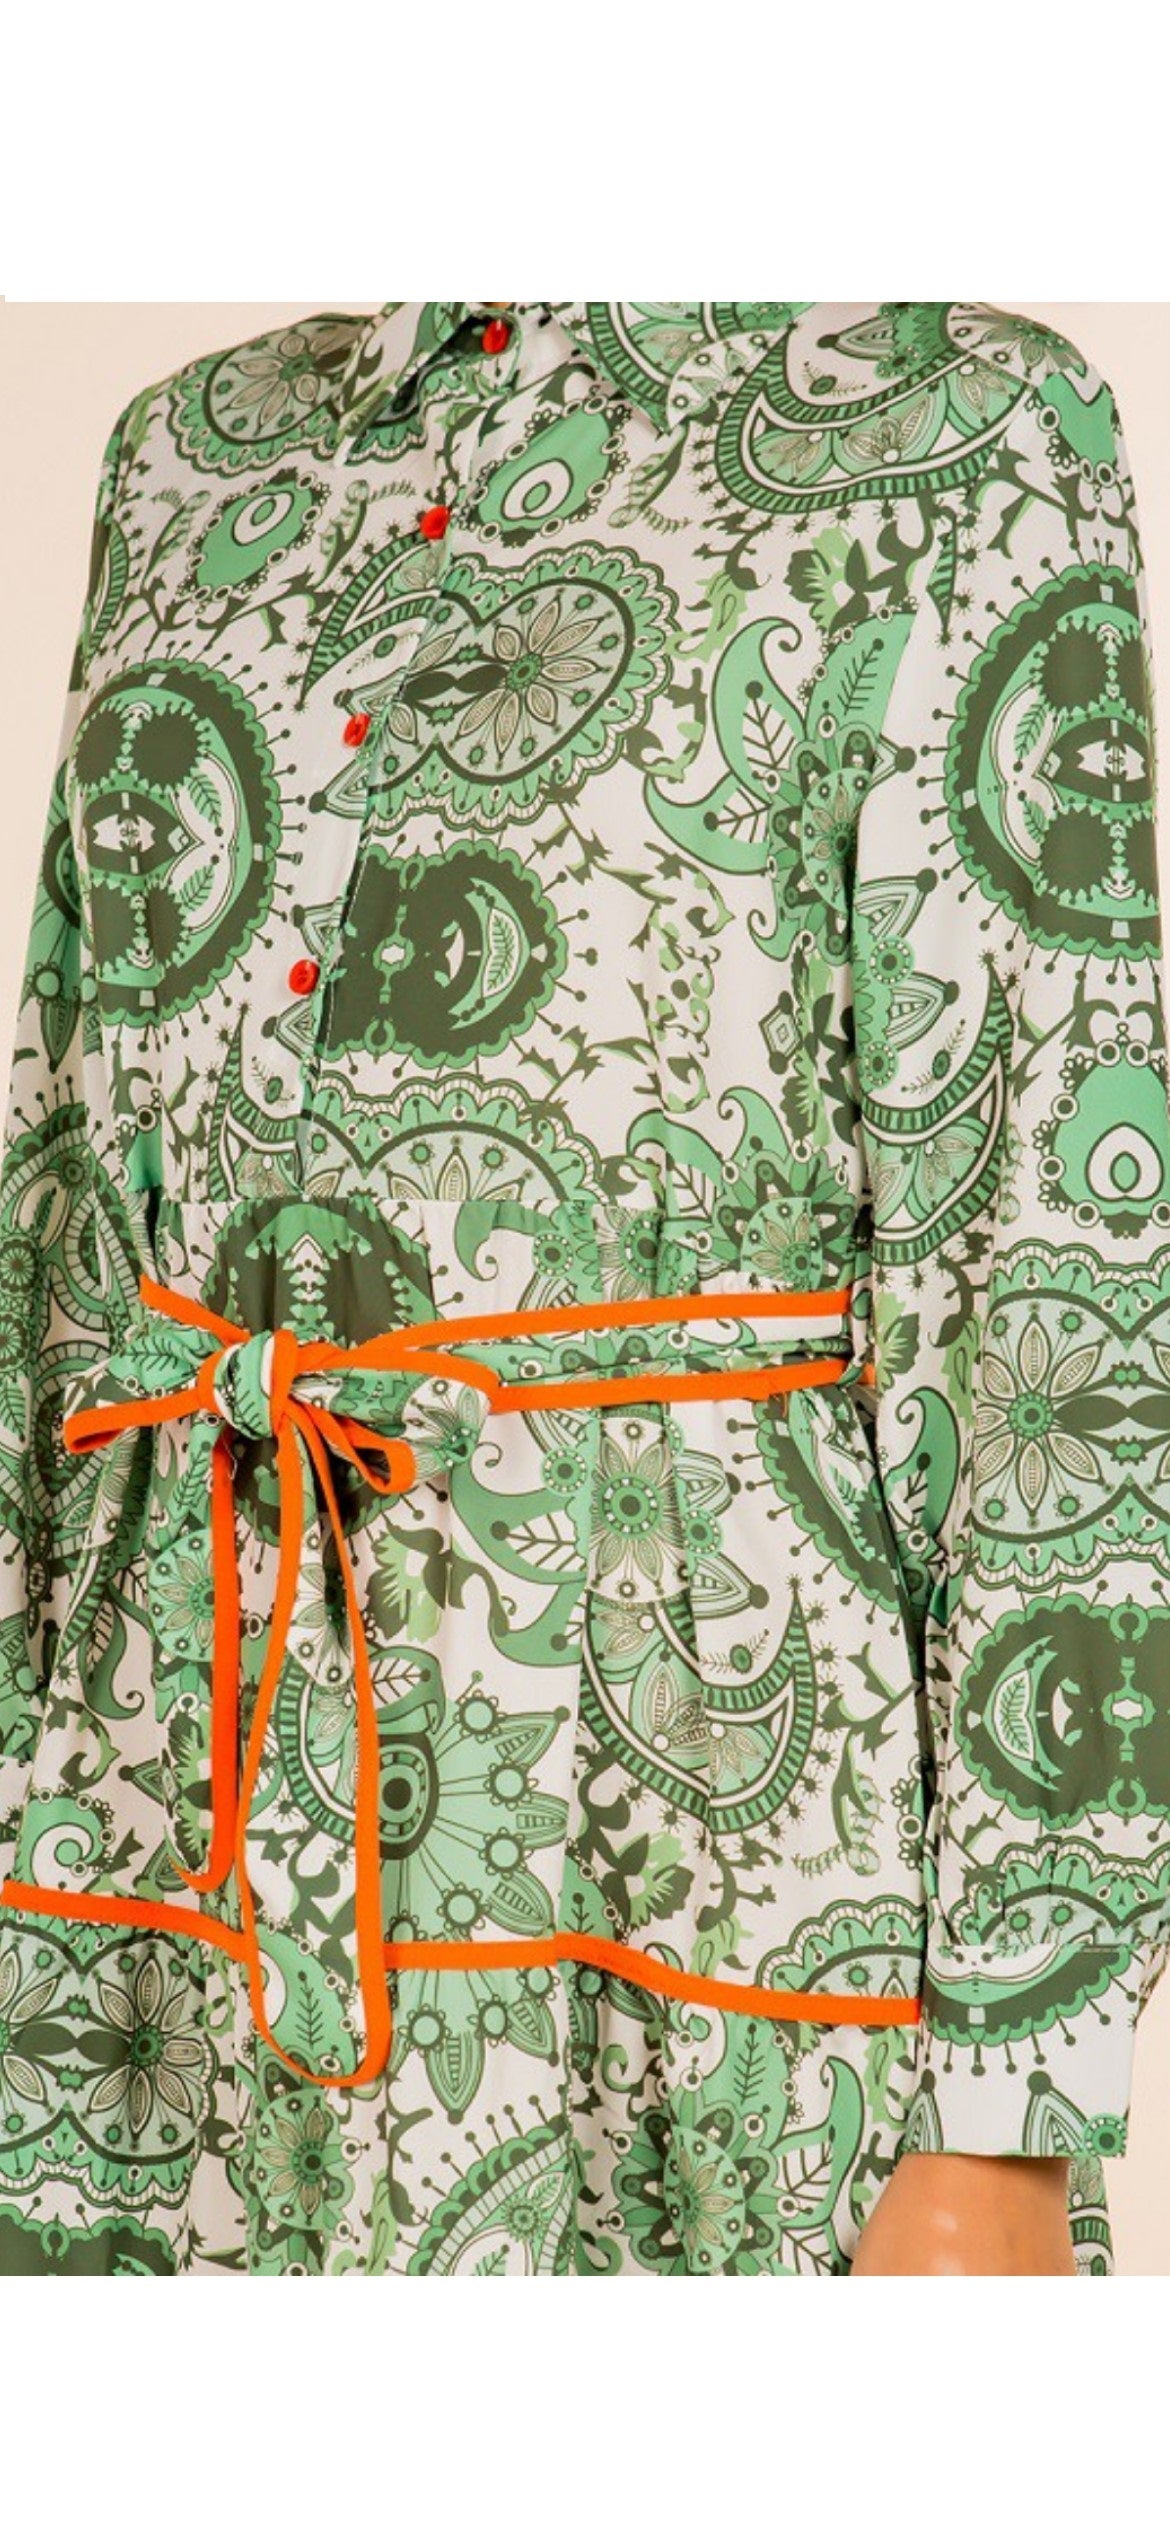 Kelly Green Printed Dress With Matching Belt - The Look By Lucy